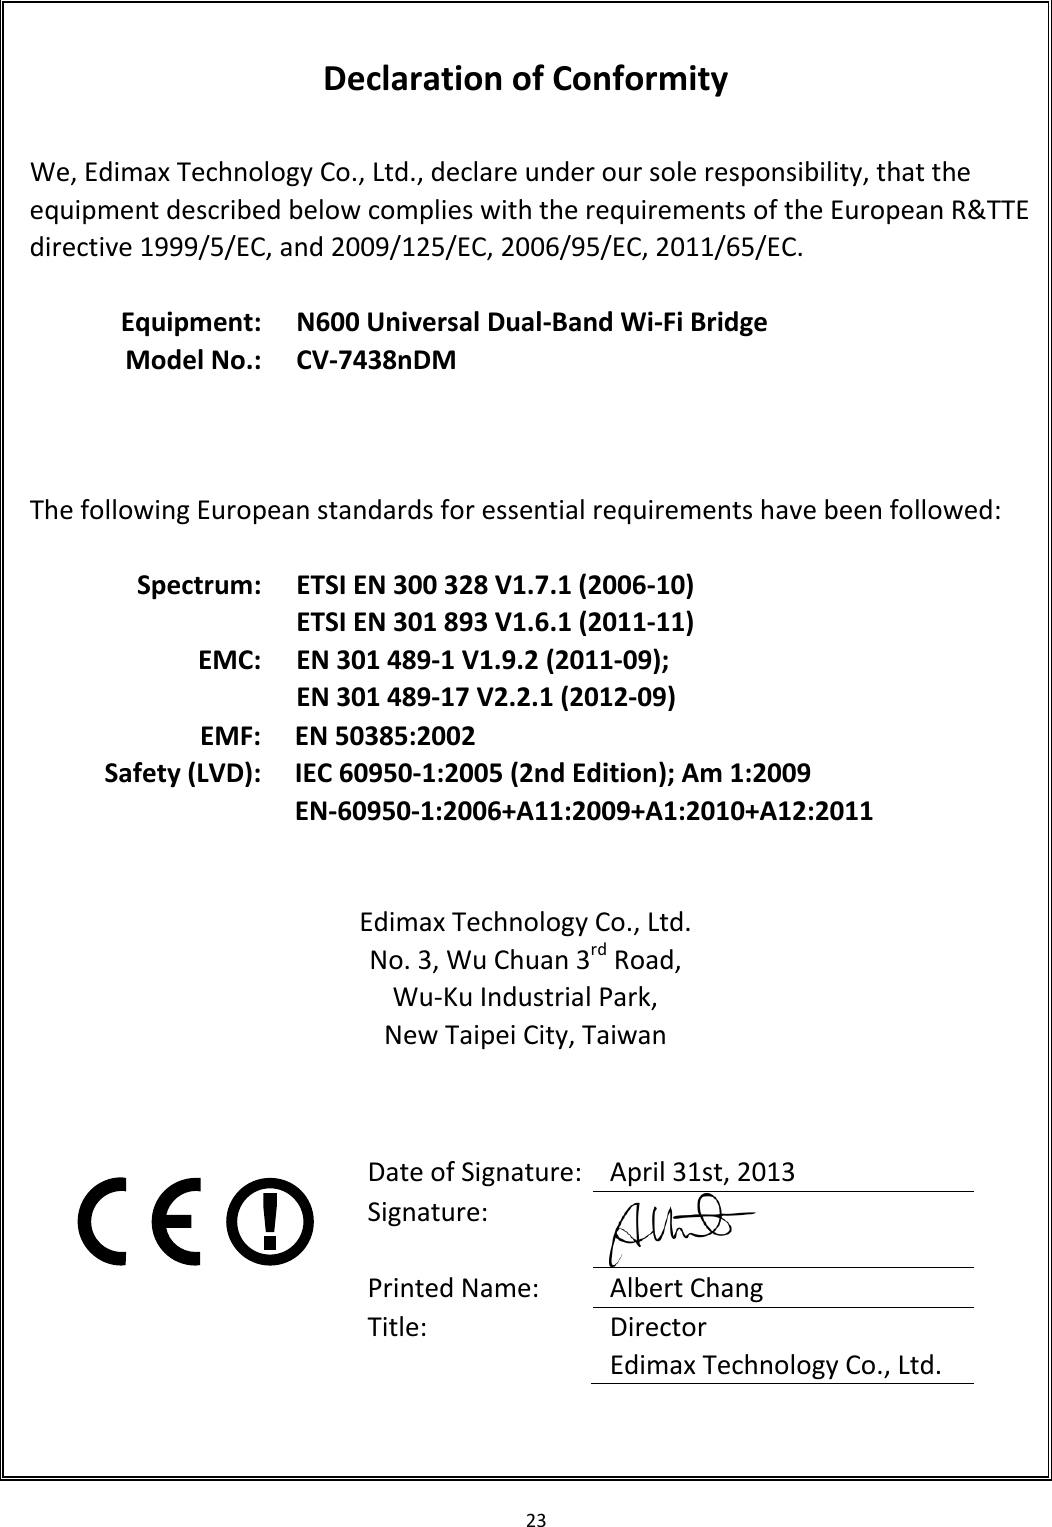 23    Declaration of Conformity  We, Edimax Technology Co., Ltd., declare under our sole responsibility, that the equipment described below complies with the requirements of the European R&amp;TTE directive 1999/5/EC, and 2009/125/EC, 2006/95/EC, 2011/65/EC.  Equipment: N600 Universal Dual-Band Wi-Fi Bridge Model No.: CV-7438nDM      The following European standards for essential requirements have been followed:  Spectrum: ETSI EN 300 328 V1.7.1 (2006-10) ETSI EN 301 893 V1.6.1 (2011-11) EMC: EN 301 489-1 V1.9.2 (2011-09); EN 301 489-17 V2.2.1 (2012-09) EMF: EN 50385:2002 Safety (LVD): IEC 60950-1:2005 (2nd Edition); Am 1:2009 EN-60950-1:2006+A11:2009+A1:2010+A12:2011   Edimax Technology Co., Ltd. No. 3, Wu Chuan 3rd Road, Wu-Ku Industrial Park, New Taipei City, Taiwan       Date of Signature: April 31st, 2013 Signature:  Printed Name: Albert Chang Title: Director Edimax Technology Co., Ltd.  